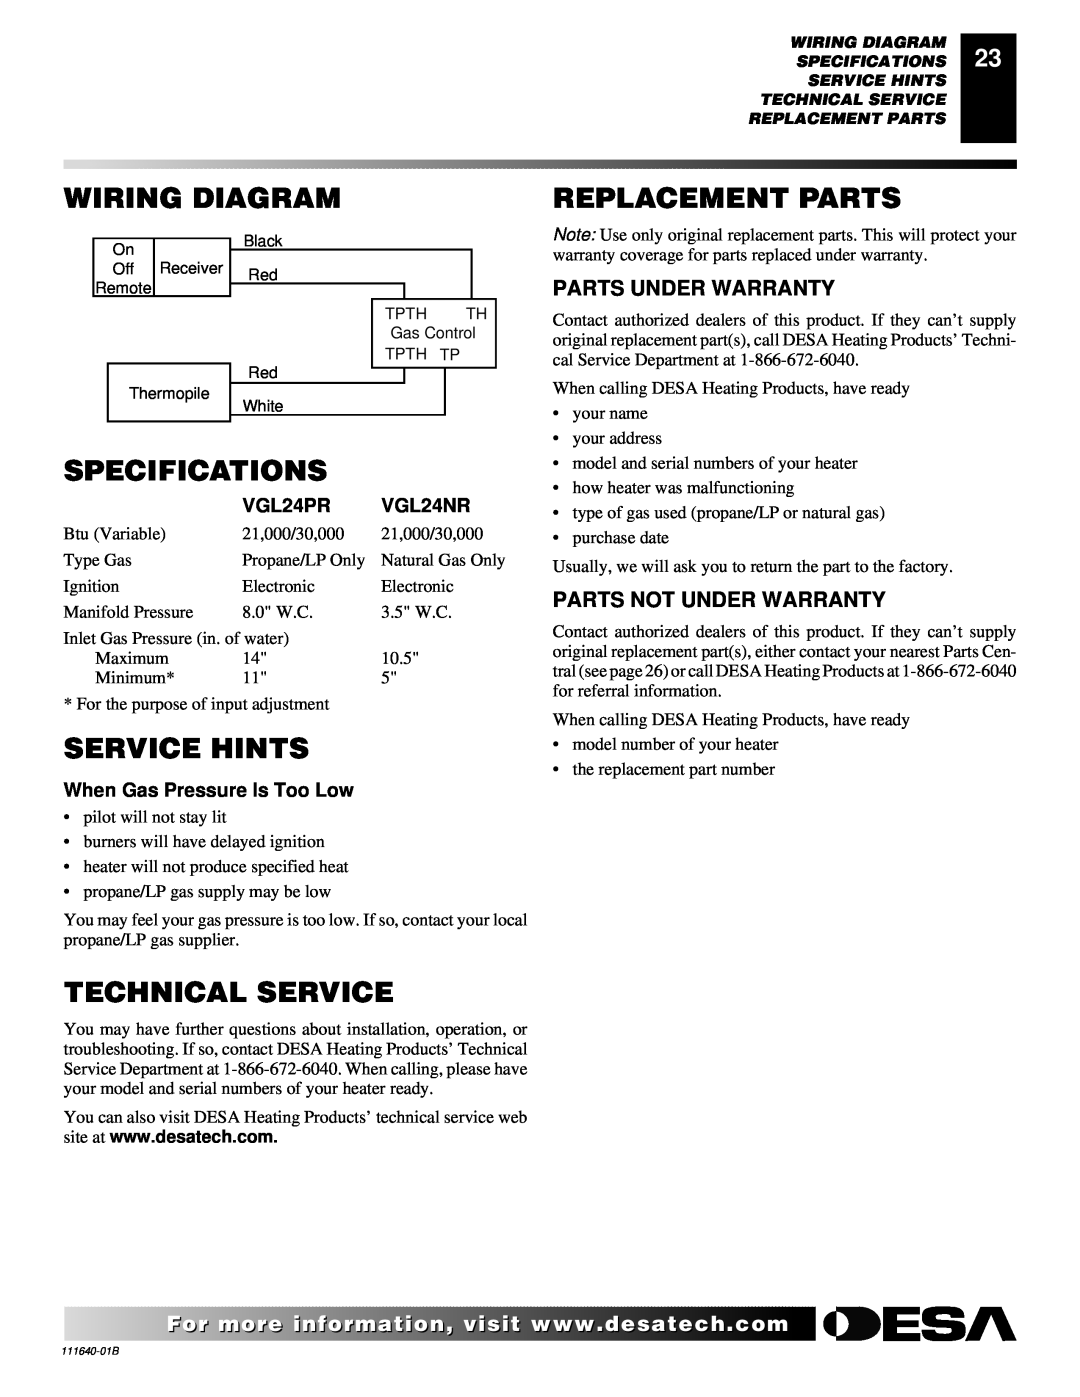 Desa VGL24NR Wiring Diagram, Replacement Parts, Specifications, Service Hints, Technical Service, Parts Under Warranty 